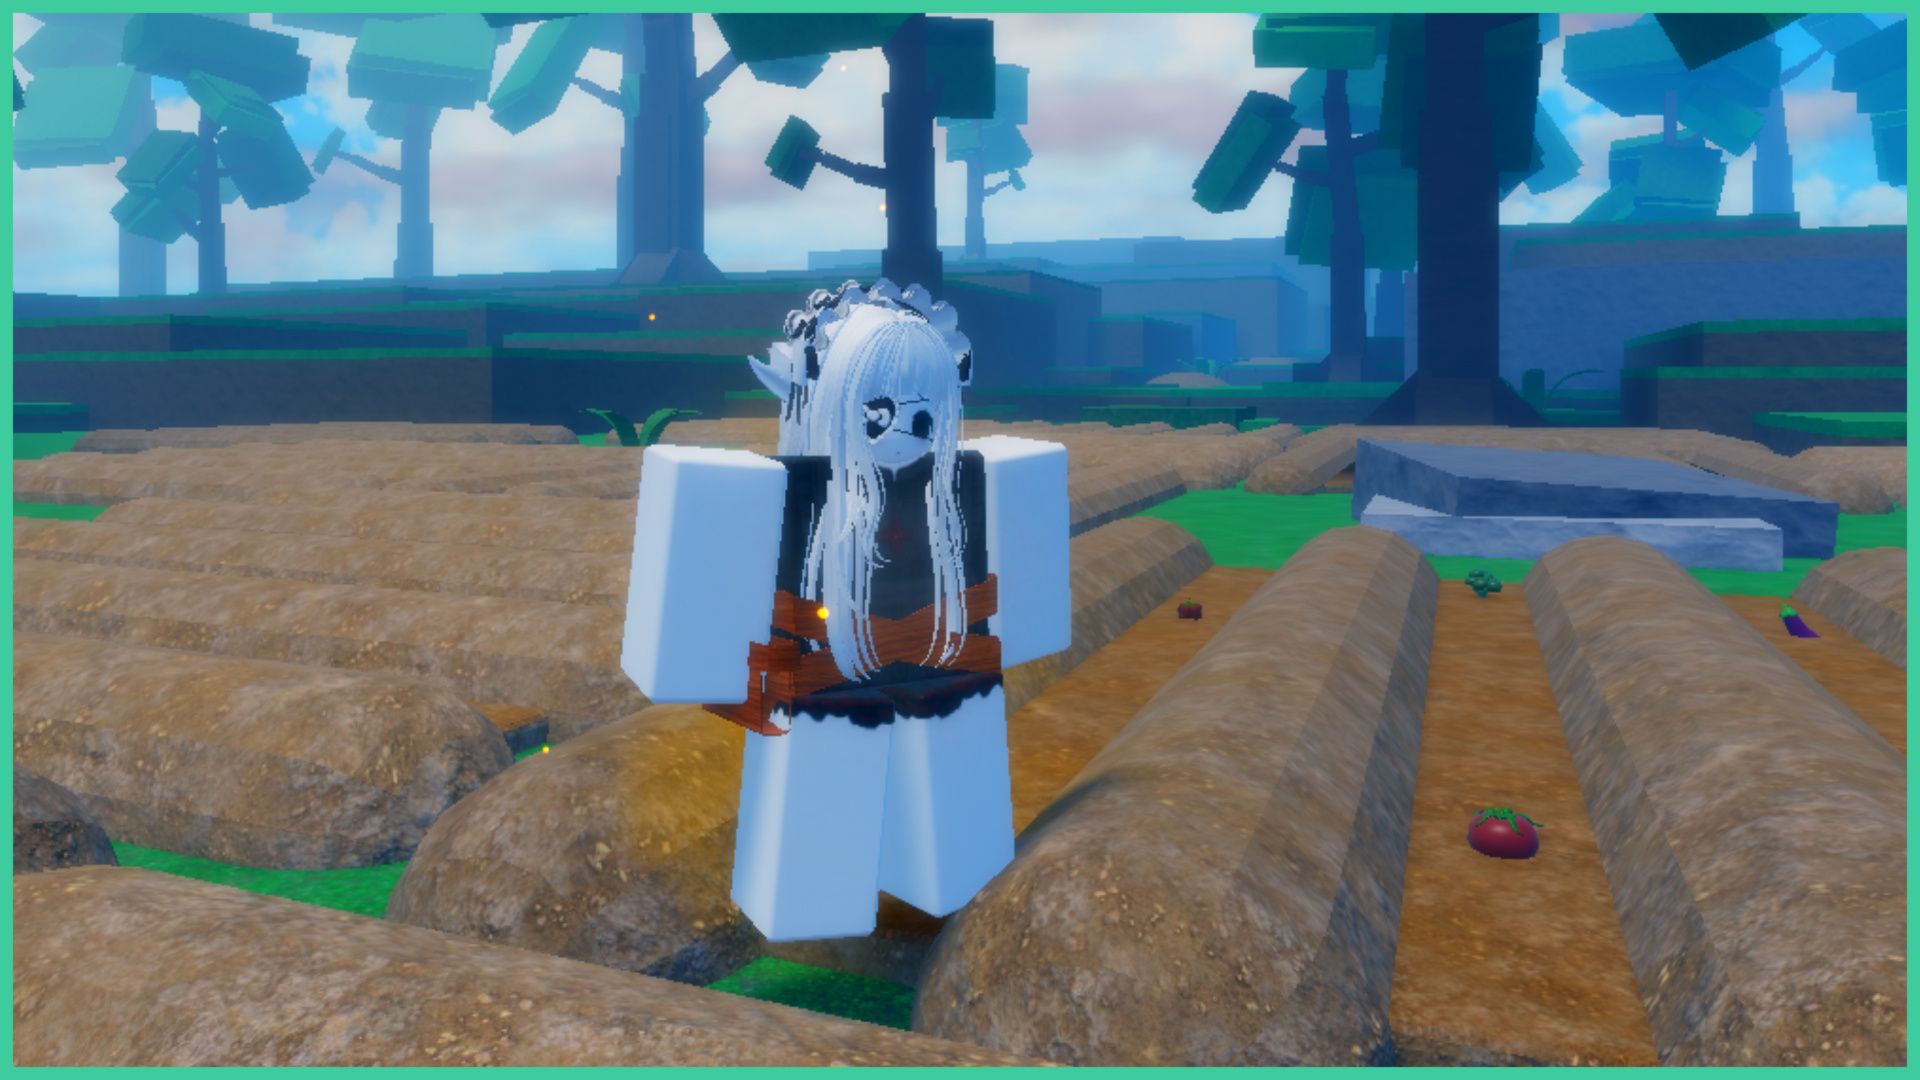 feature image for our get money in grimoires era guide, the image features a roblox player standing on the farm as vegetables such as broccoli and tomatoes are planted in the ground, there are lots of trees surrounding the farm in the distance